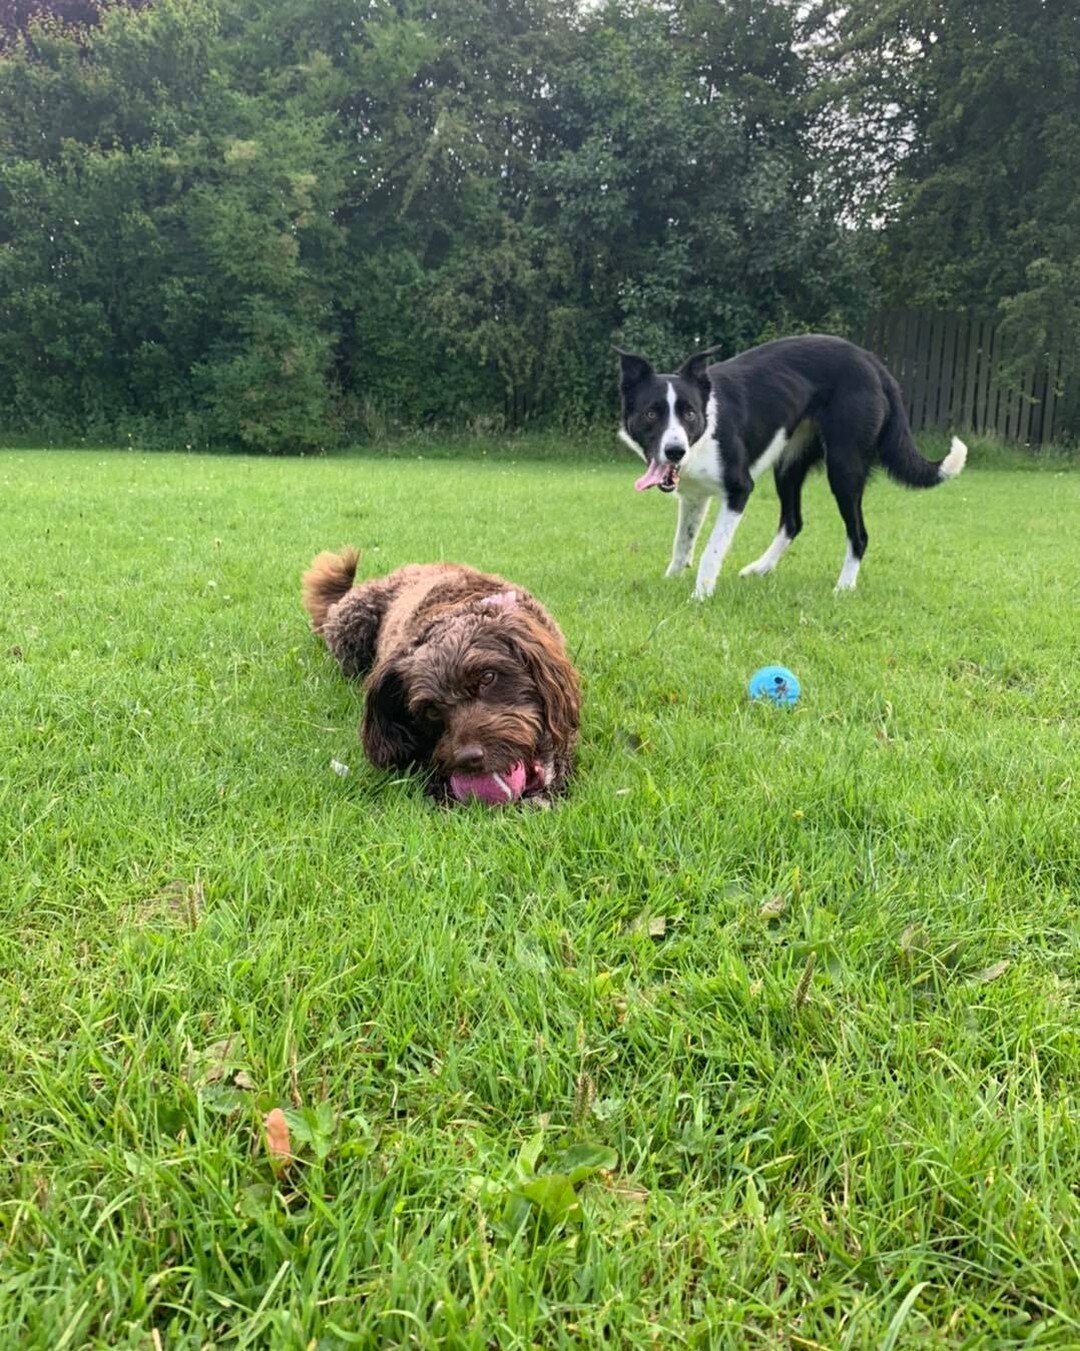 So we&rsquo;re both playing ball yes Lexi? Want to be another one of Lexi&rsquo;s friends? Give us a like and get in touch 🐕 x  #york  #yorkshire #yorkcity  #photography  #newbusiness #smallbusiness #supportsmallbusiness  #dogphotography  #dogphoto 